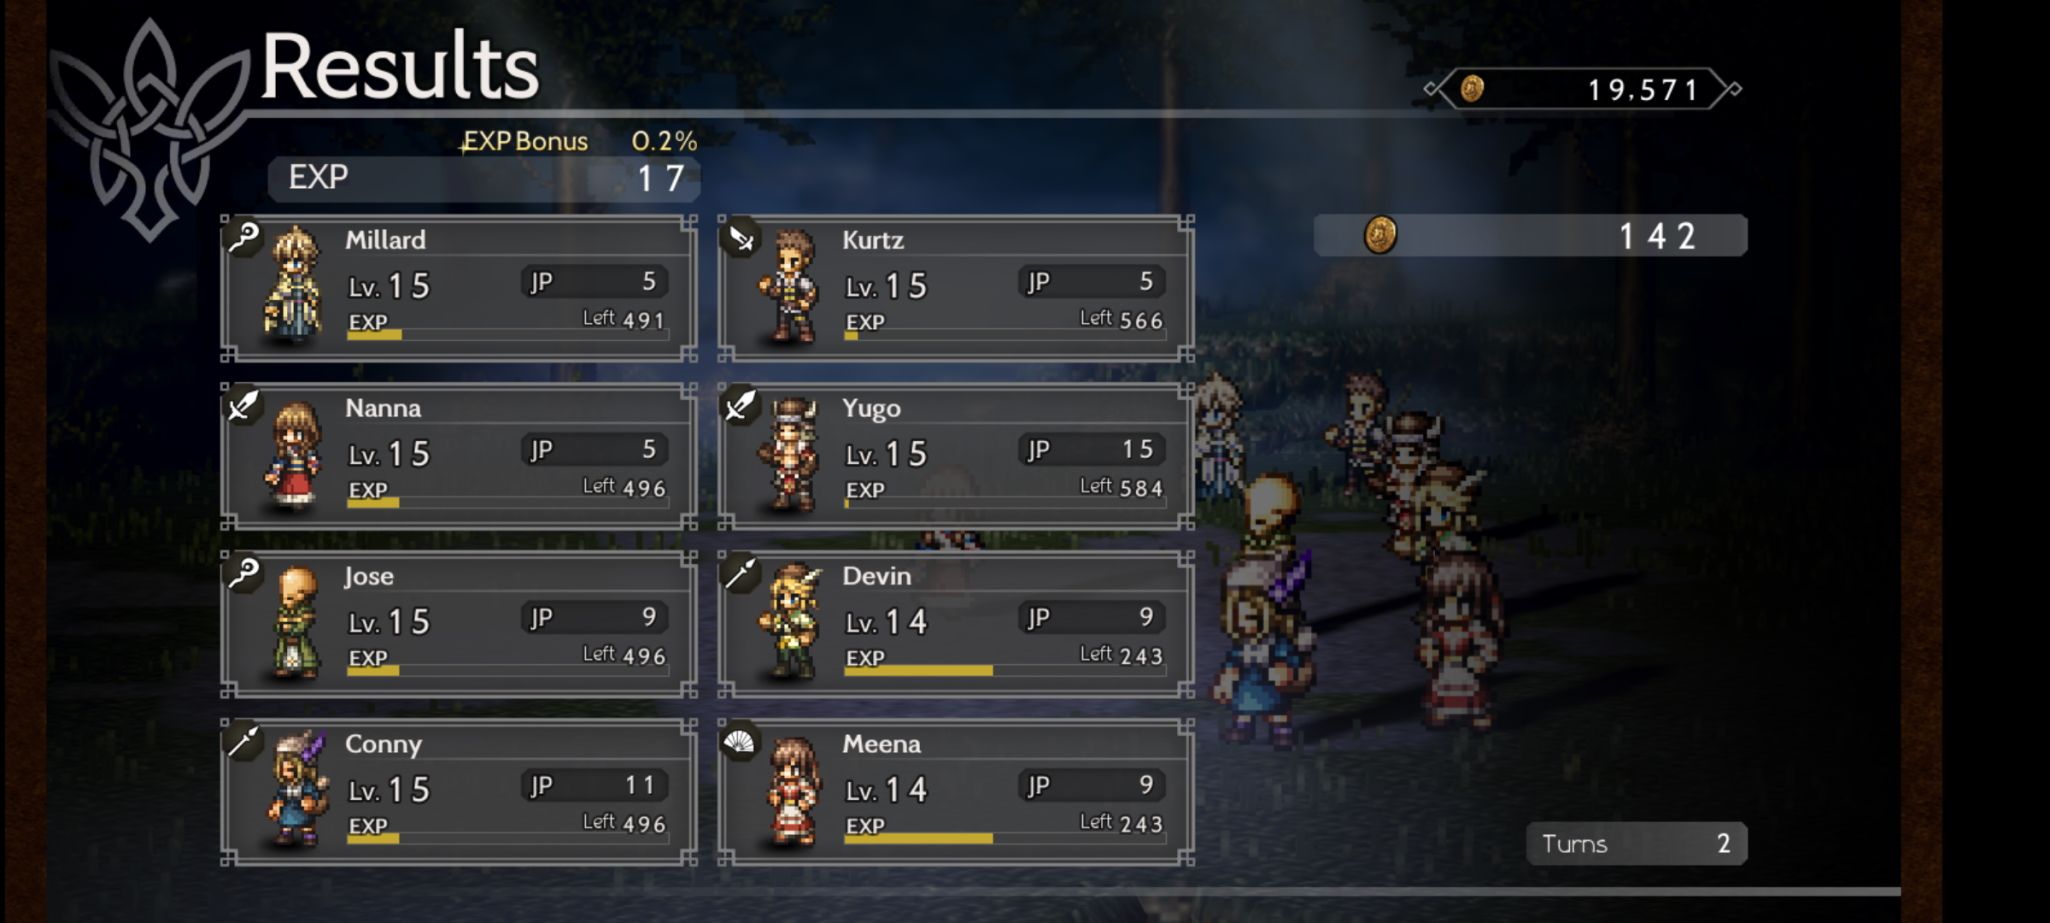 Experience points share in Octopath Traveler: Champions of the Continent